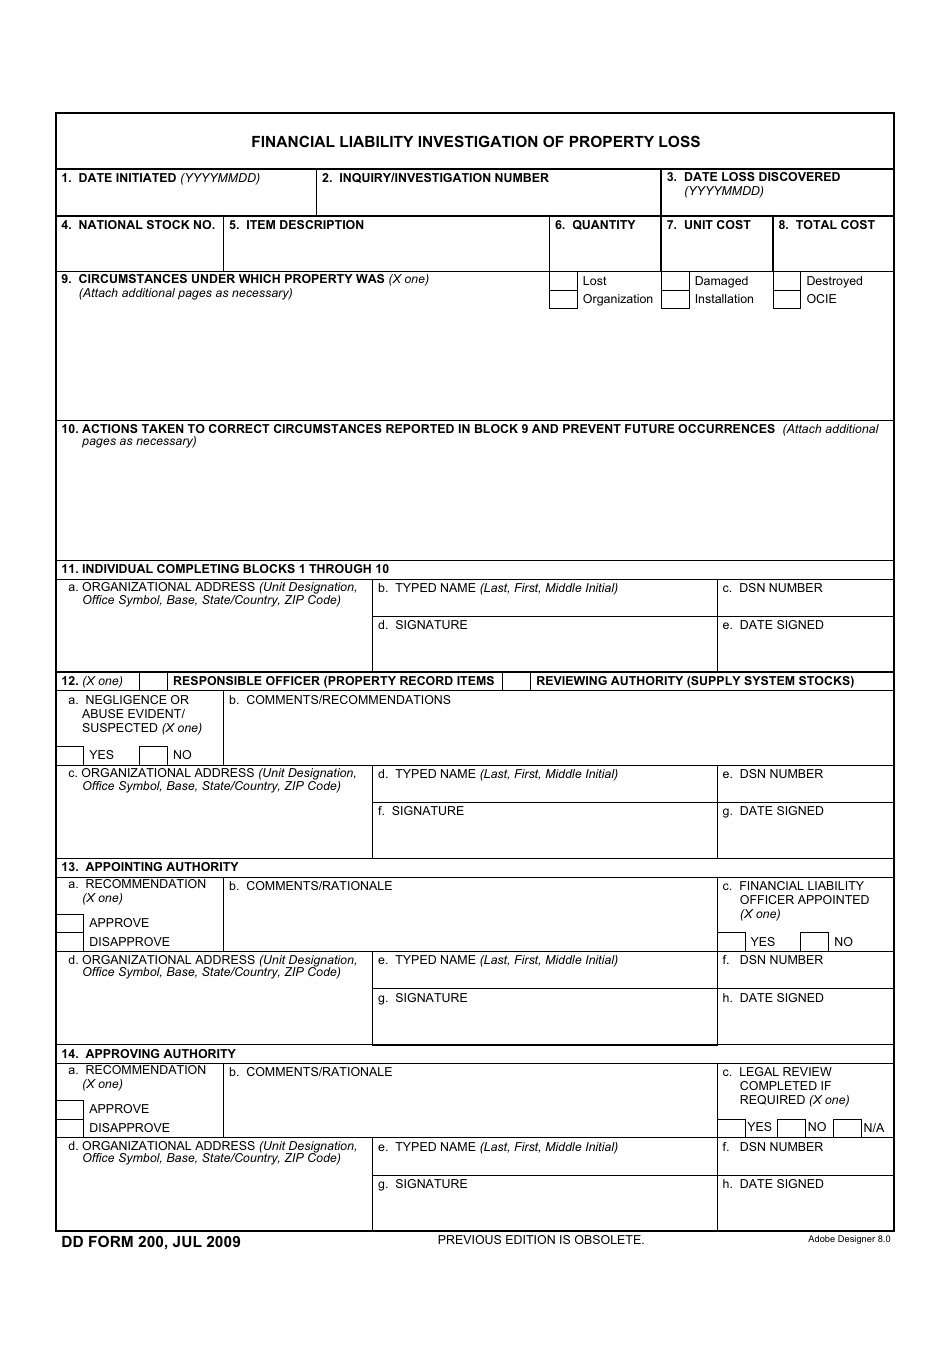 DD Form 200 Financial Liability Investigation of Property Loss, Page 1